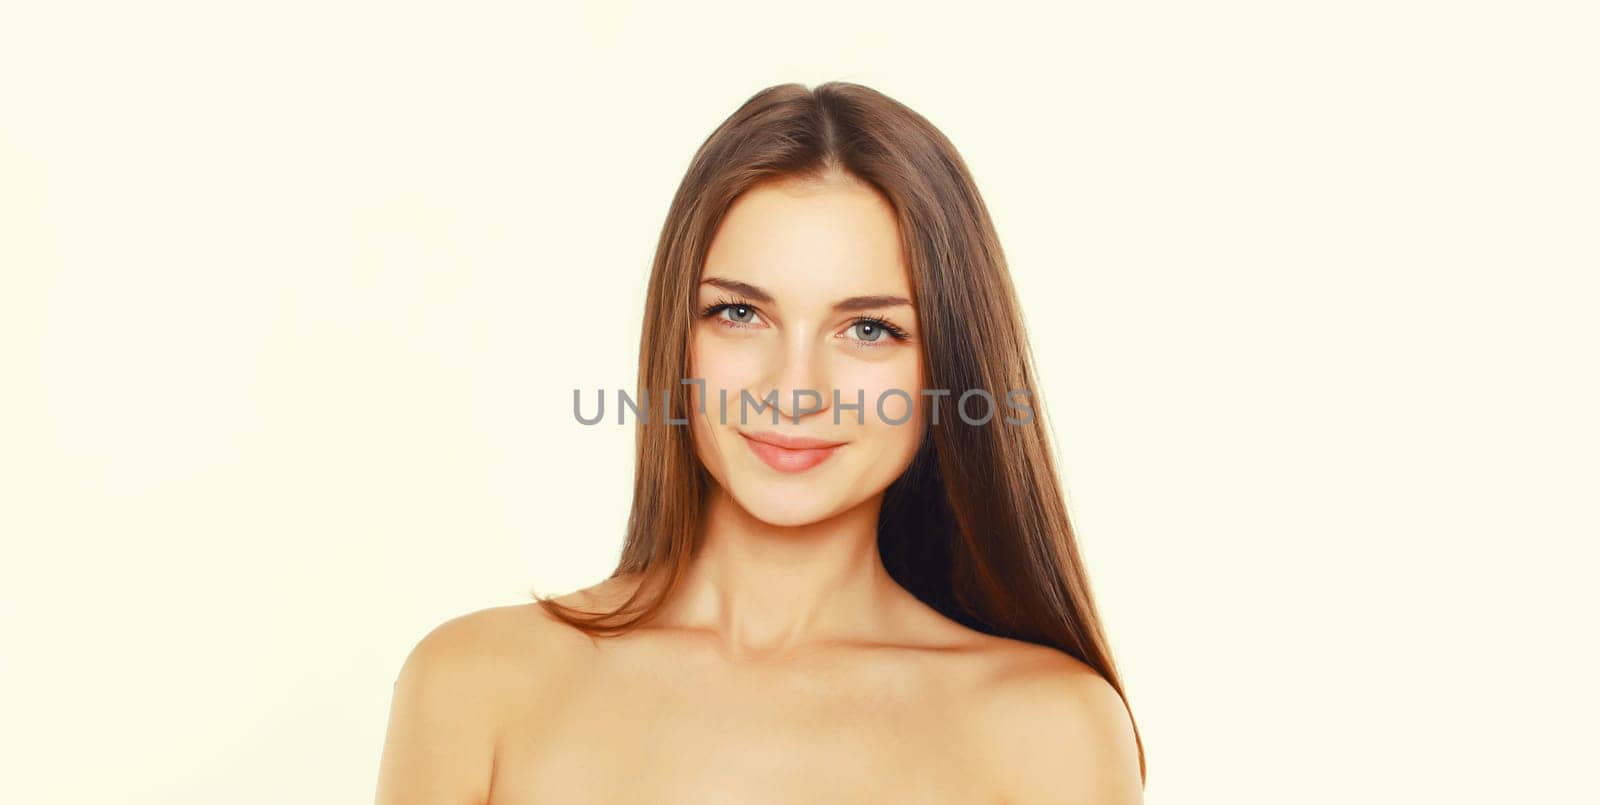 Beauty portrait of brunette smiling young woman on white studio background